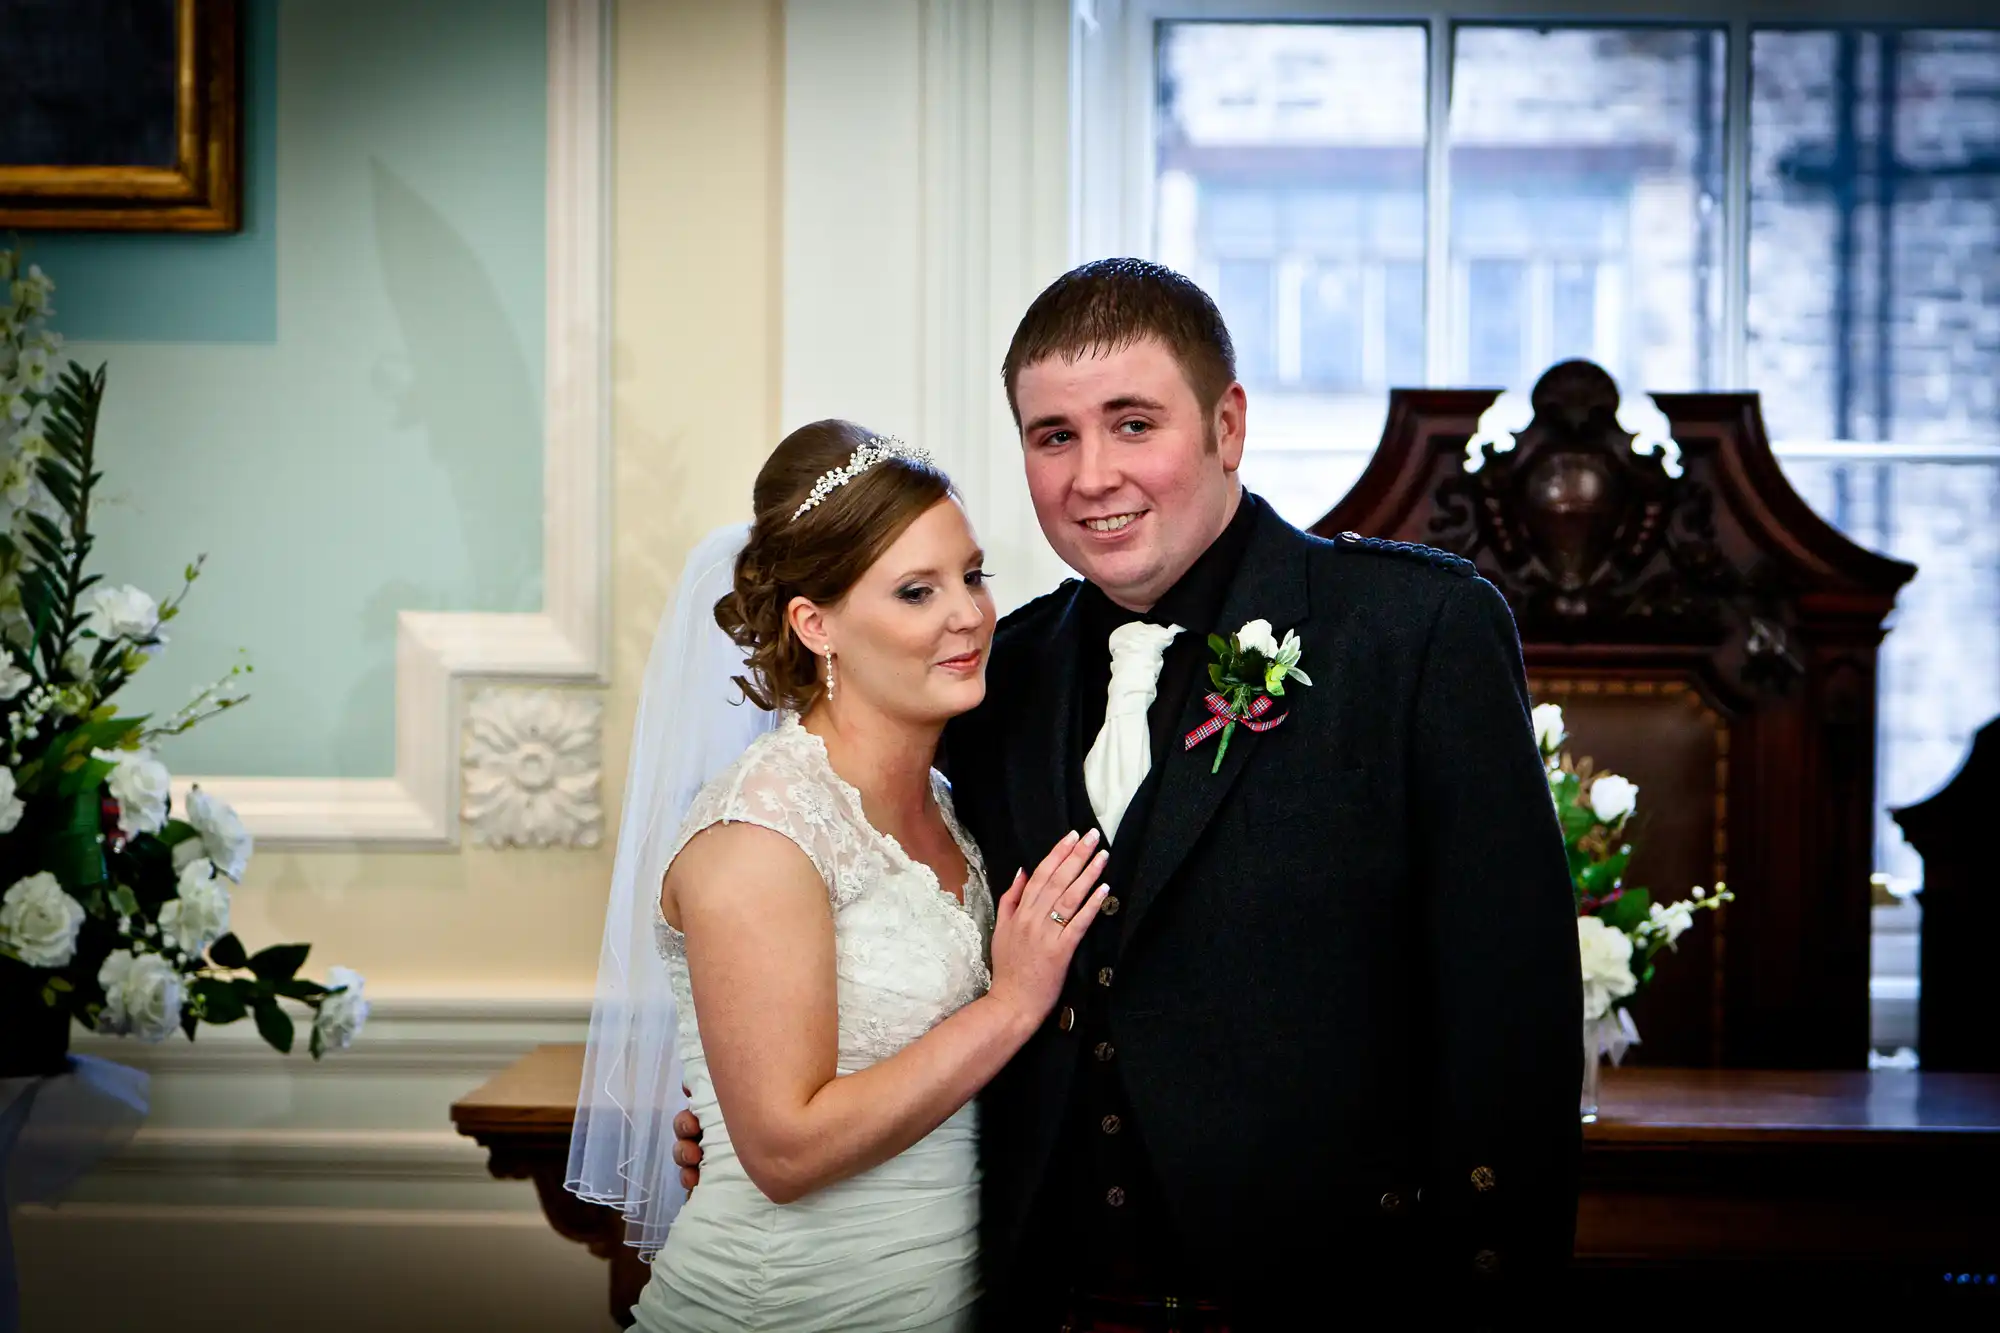 A bride and groom smiling in a classic indoor setting, the bride in a white dress and the groom in a suit and kilt.